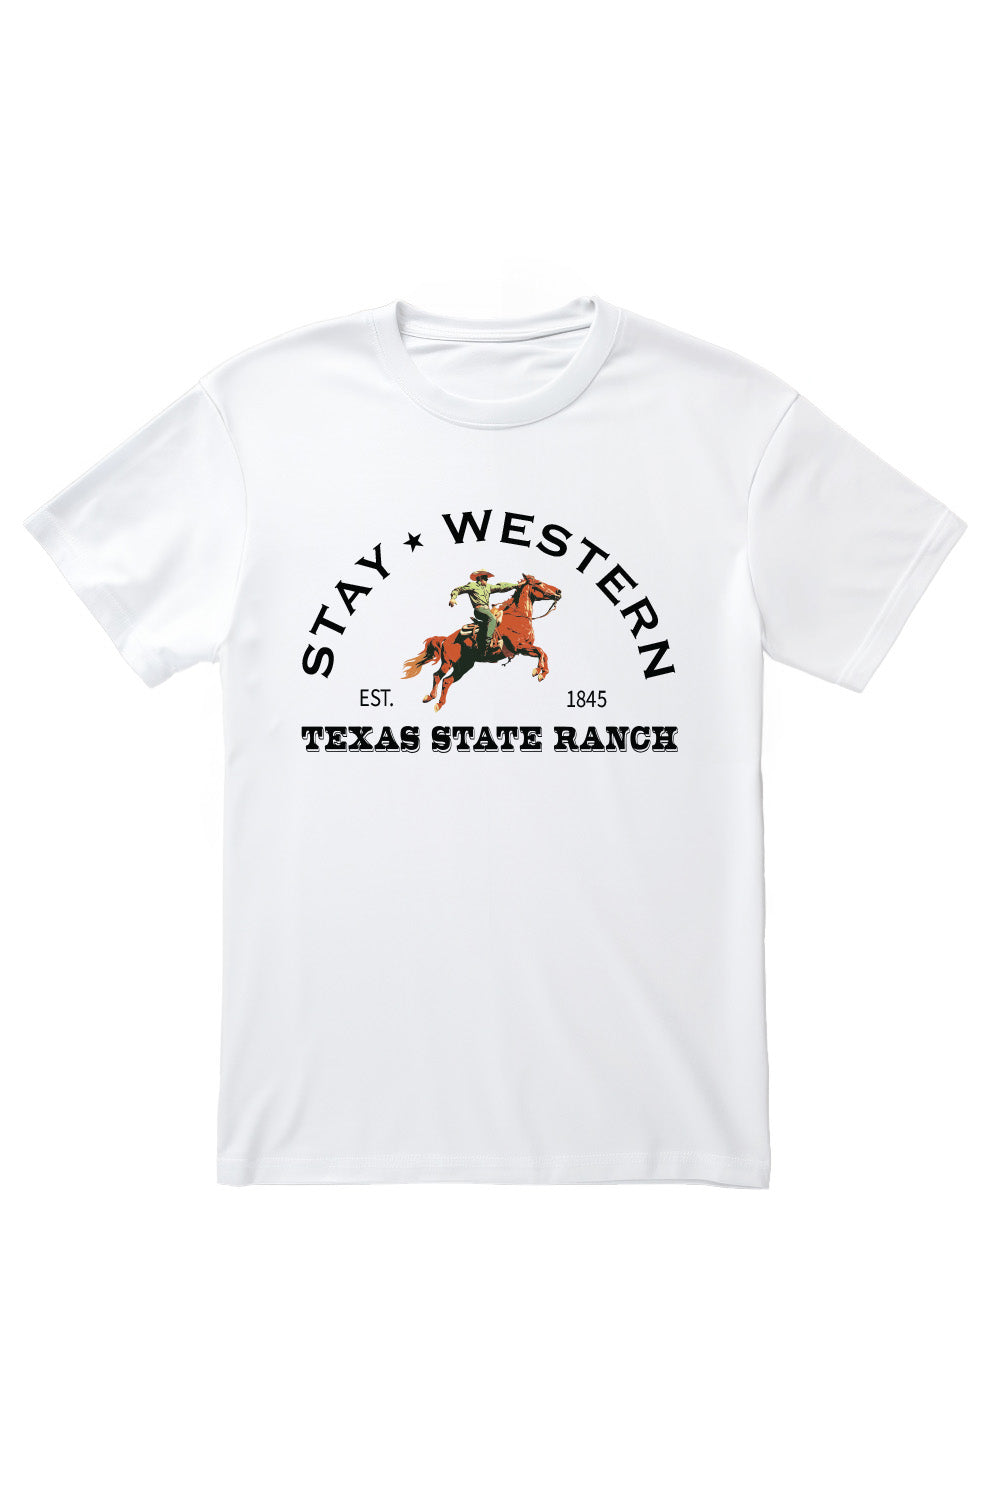 Stay Western Texas State Ranch T-Shirt